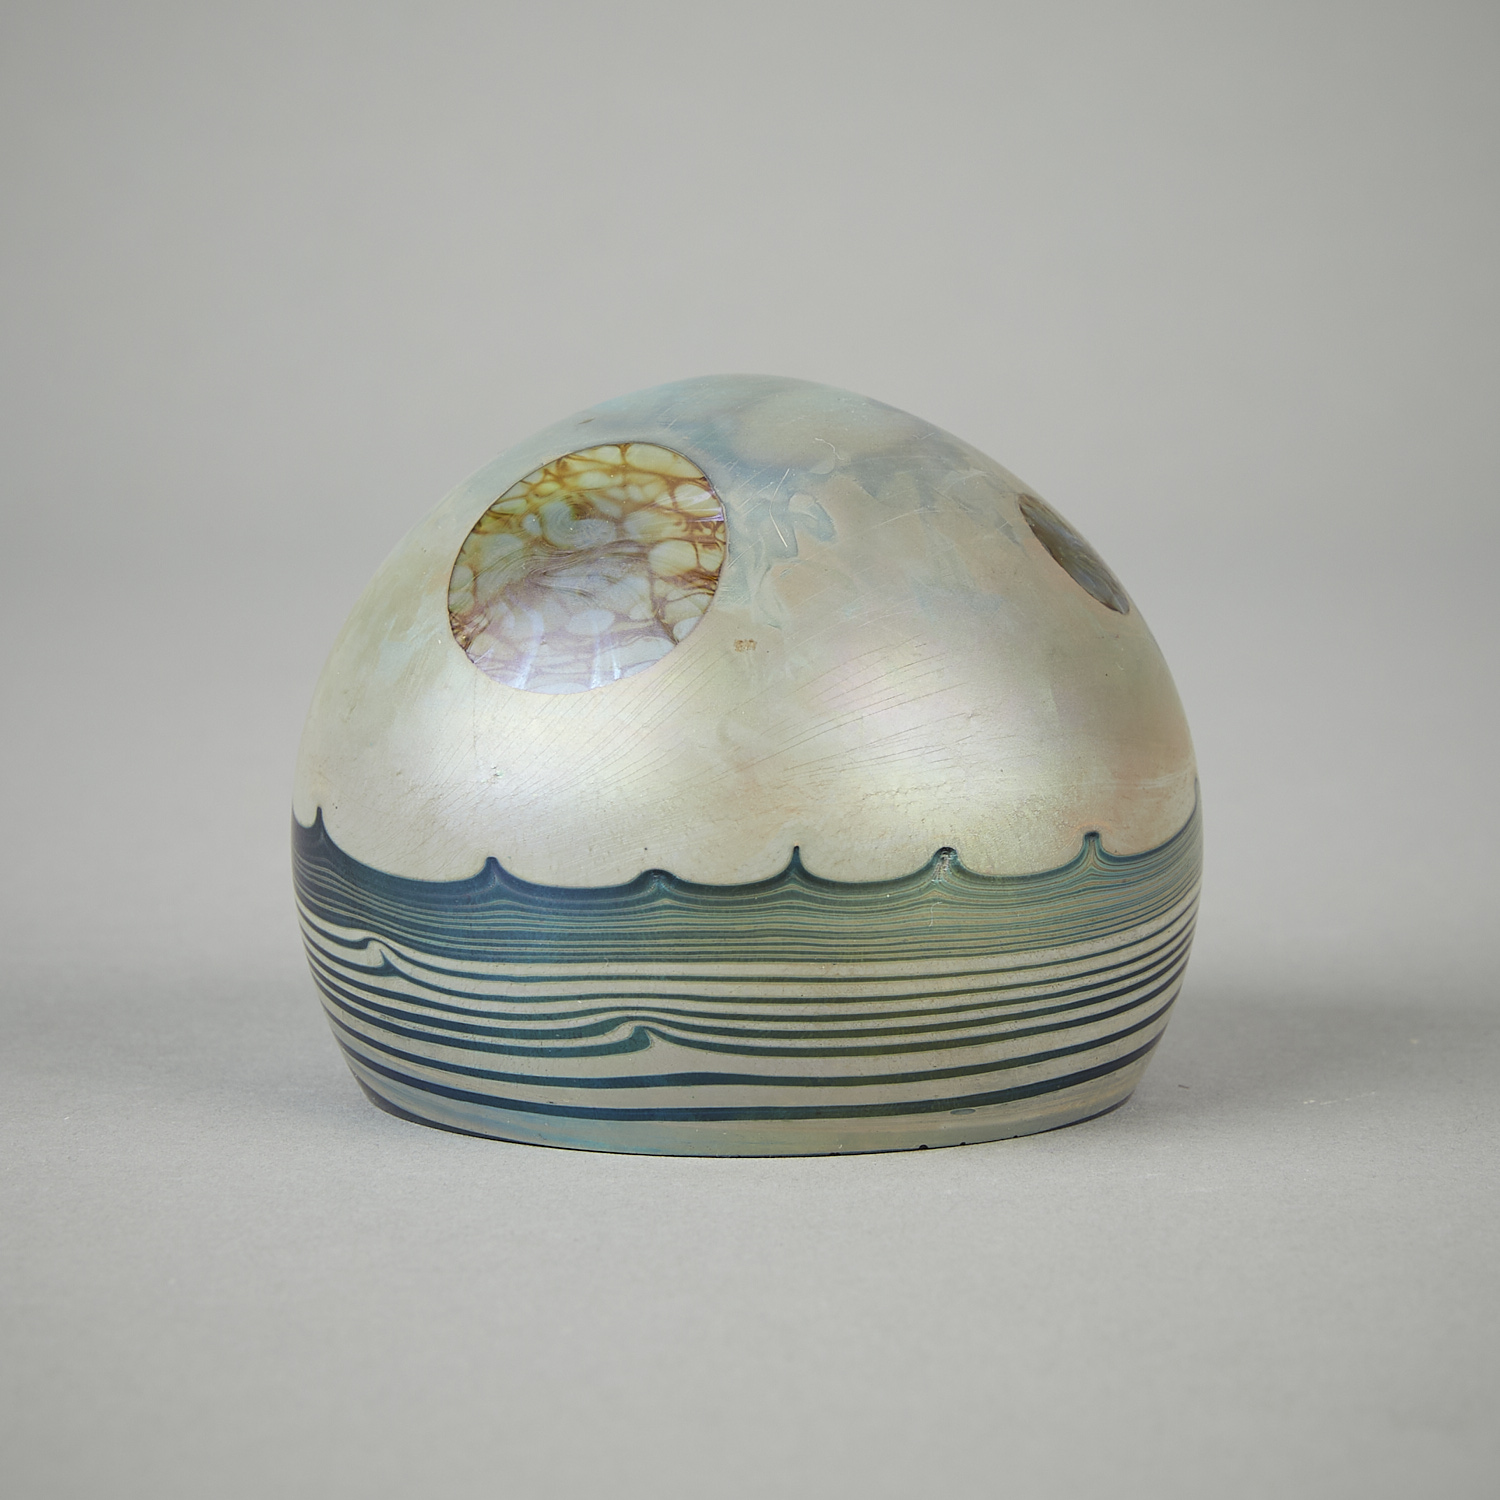 John Lewis Moon Favrile Glass Paperweight 1974 - Image 3 of 5